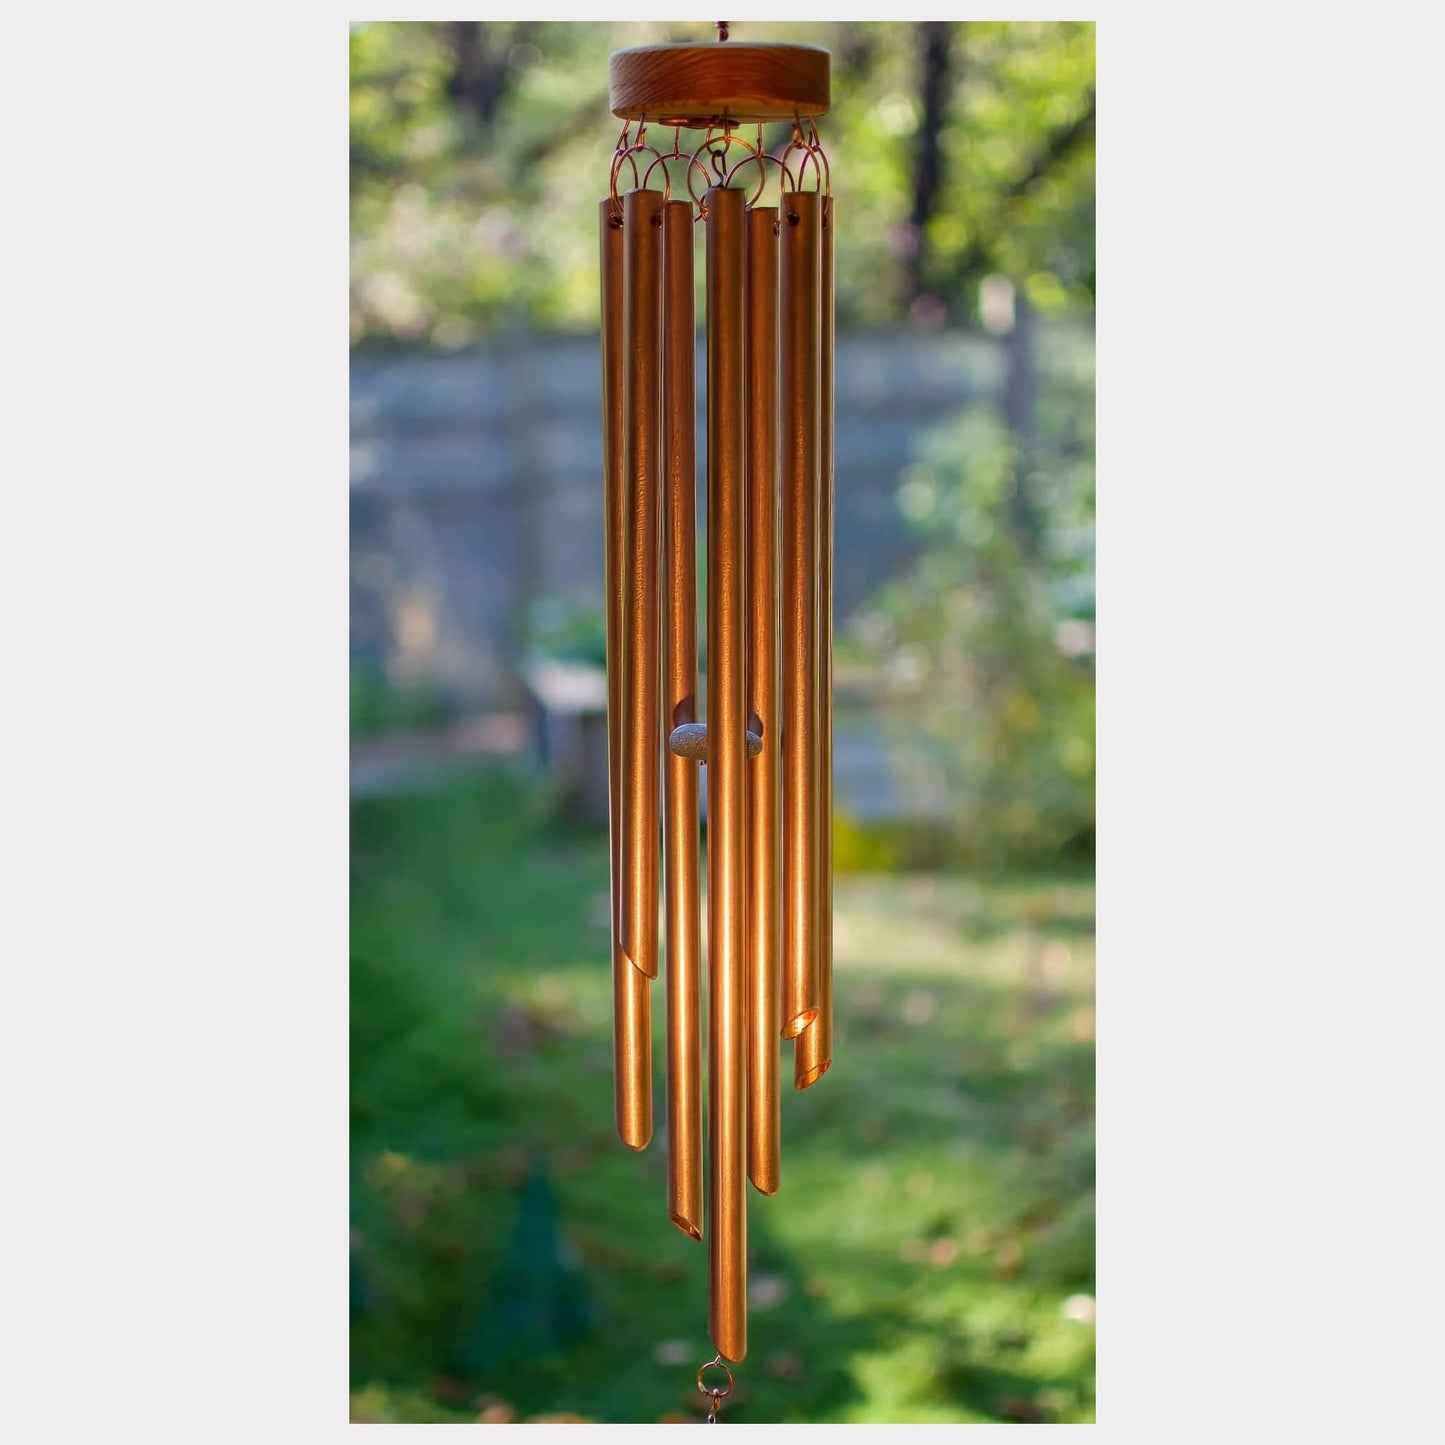 handcrafted copper wind chime by Coast Chimes